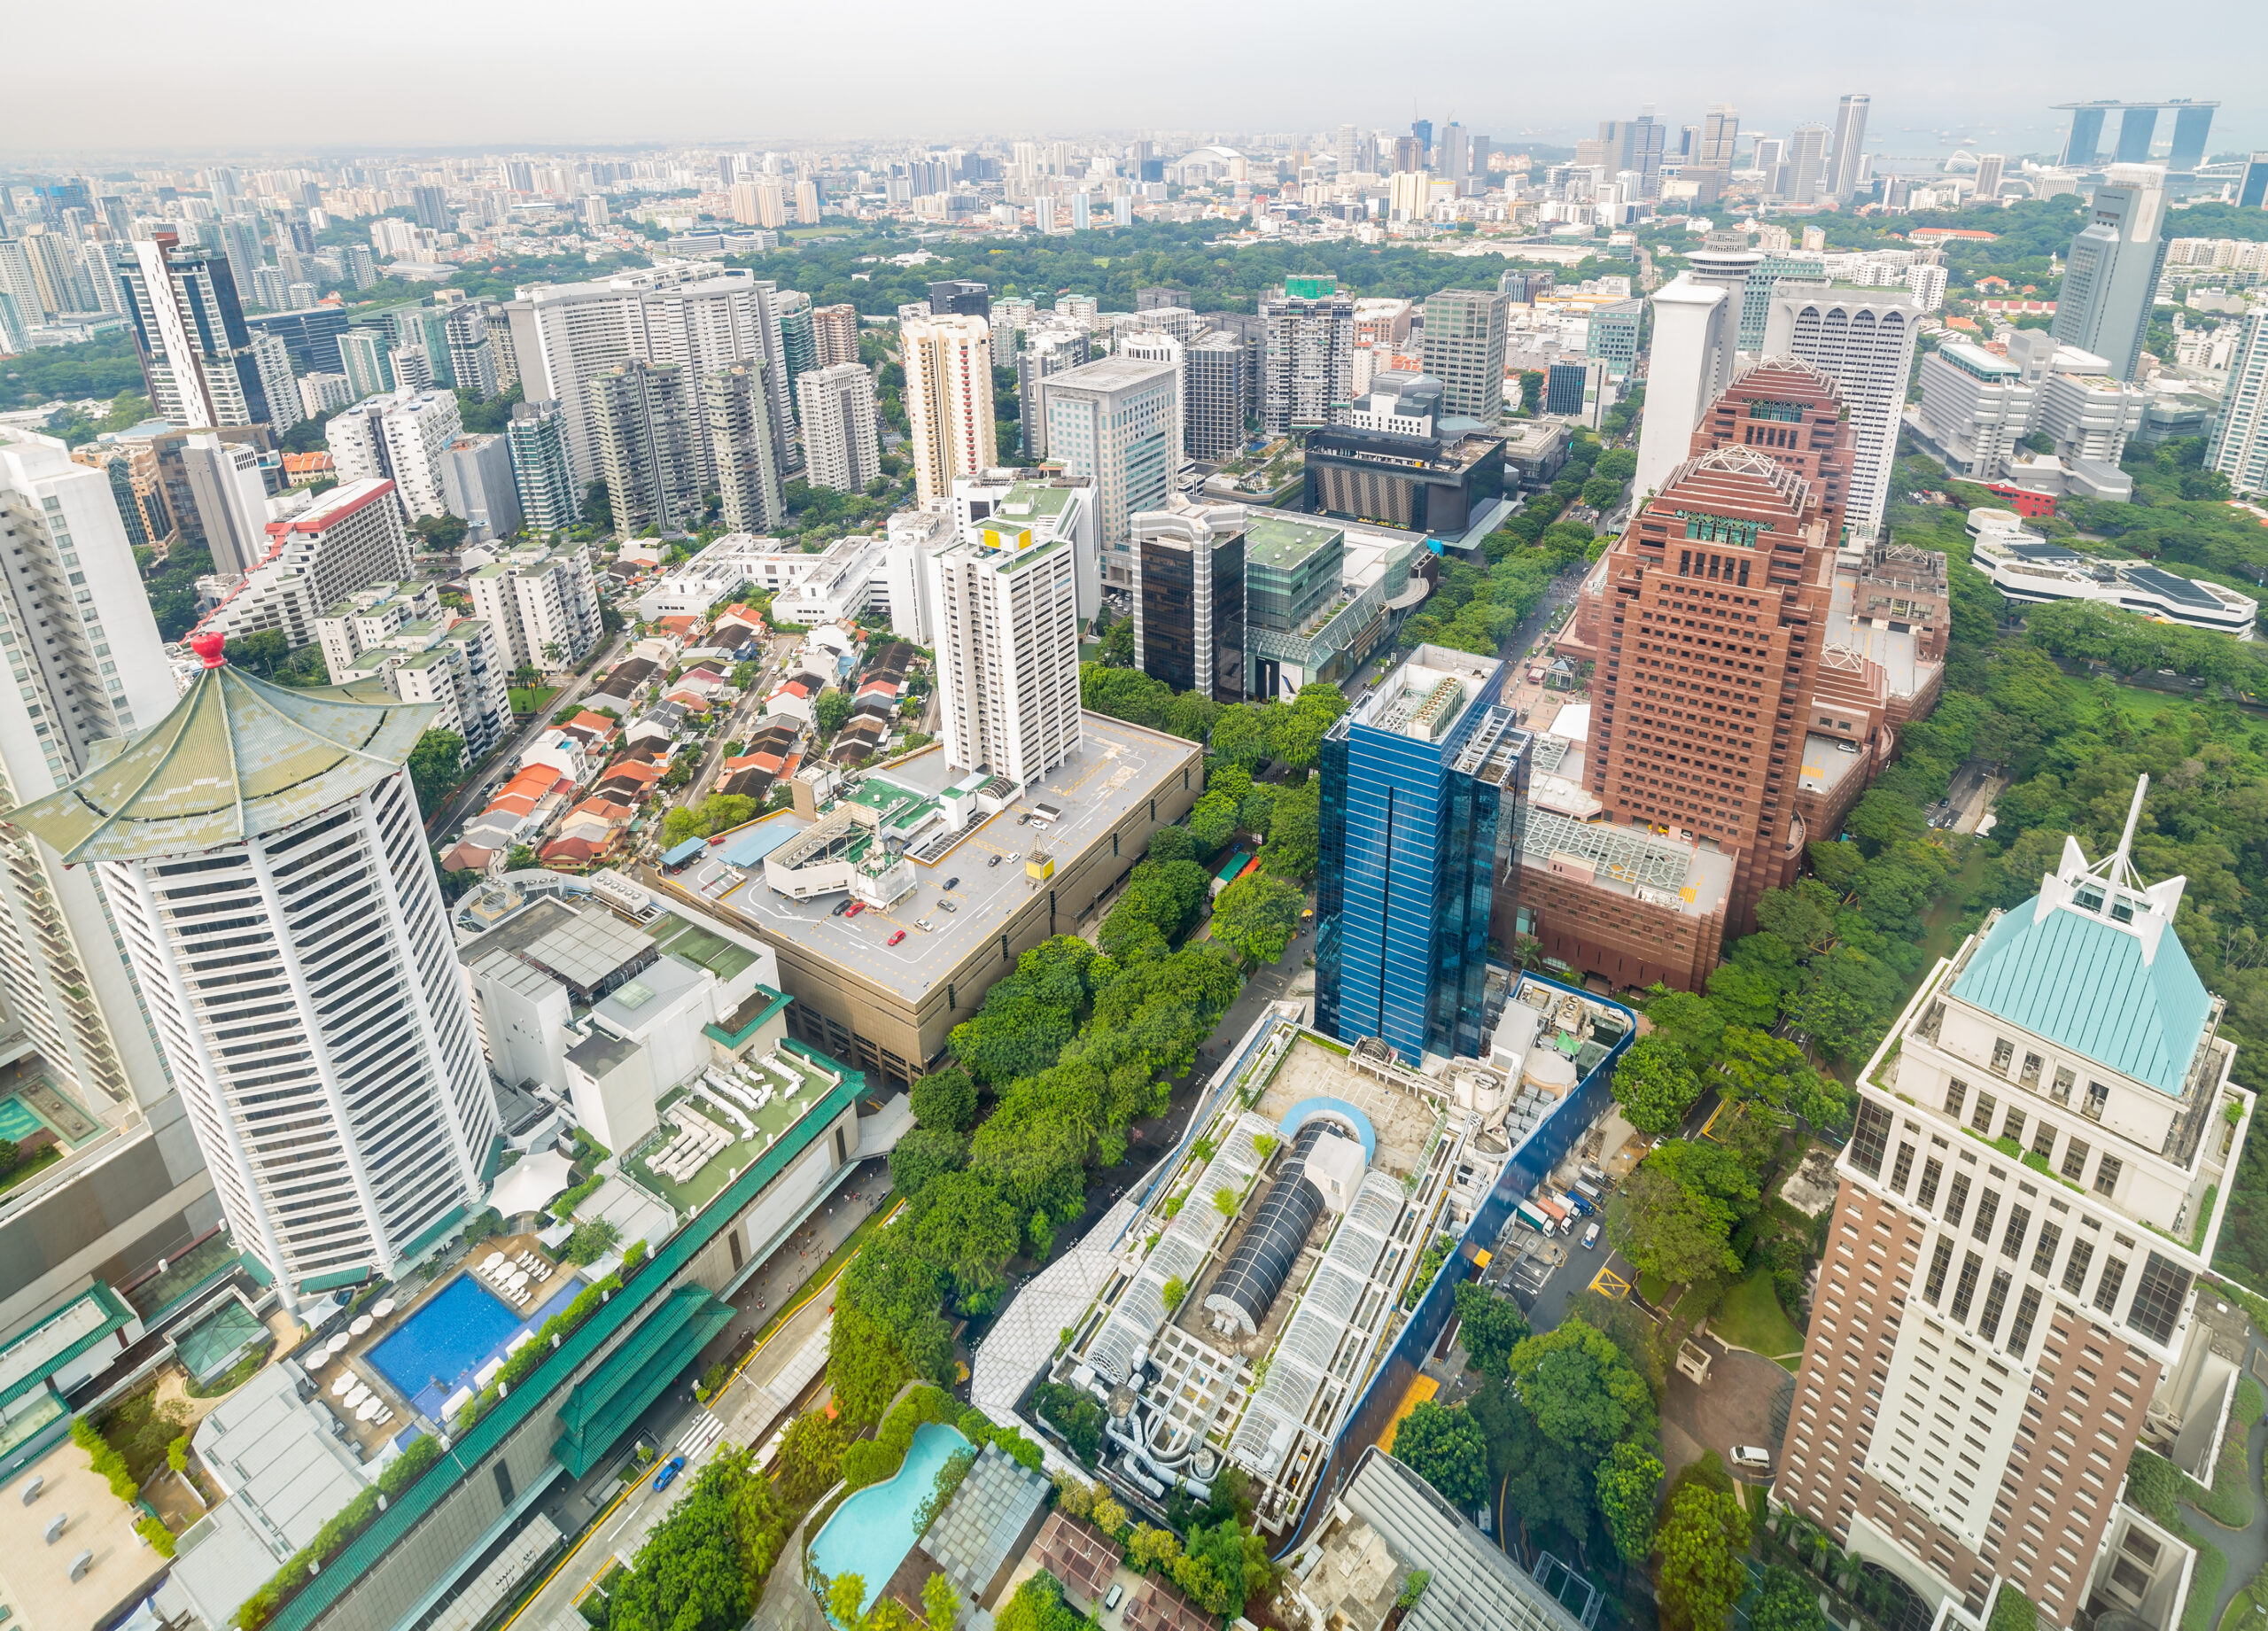 An aerial shot of Orchard Road, the vibrant hub of Singapore’s metropolis